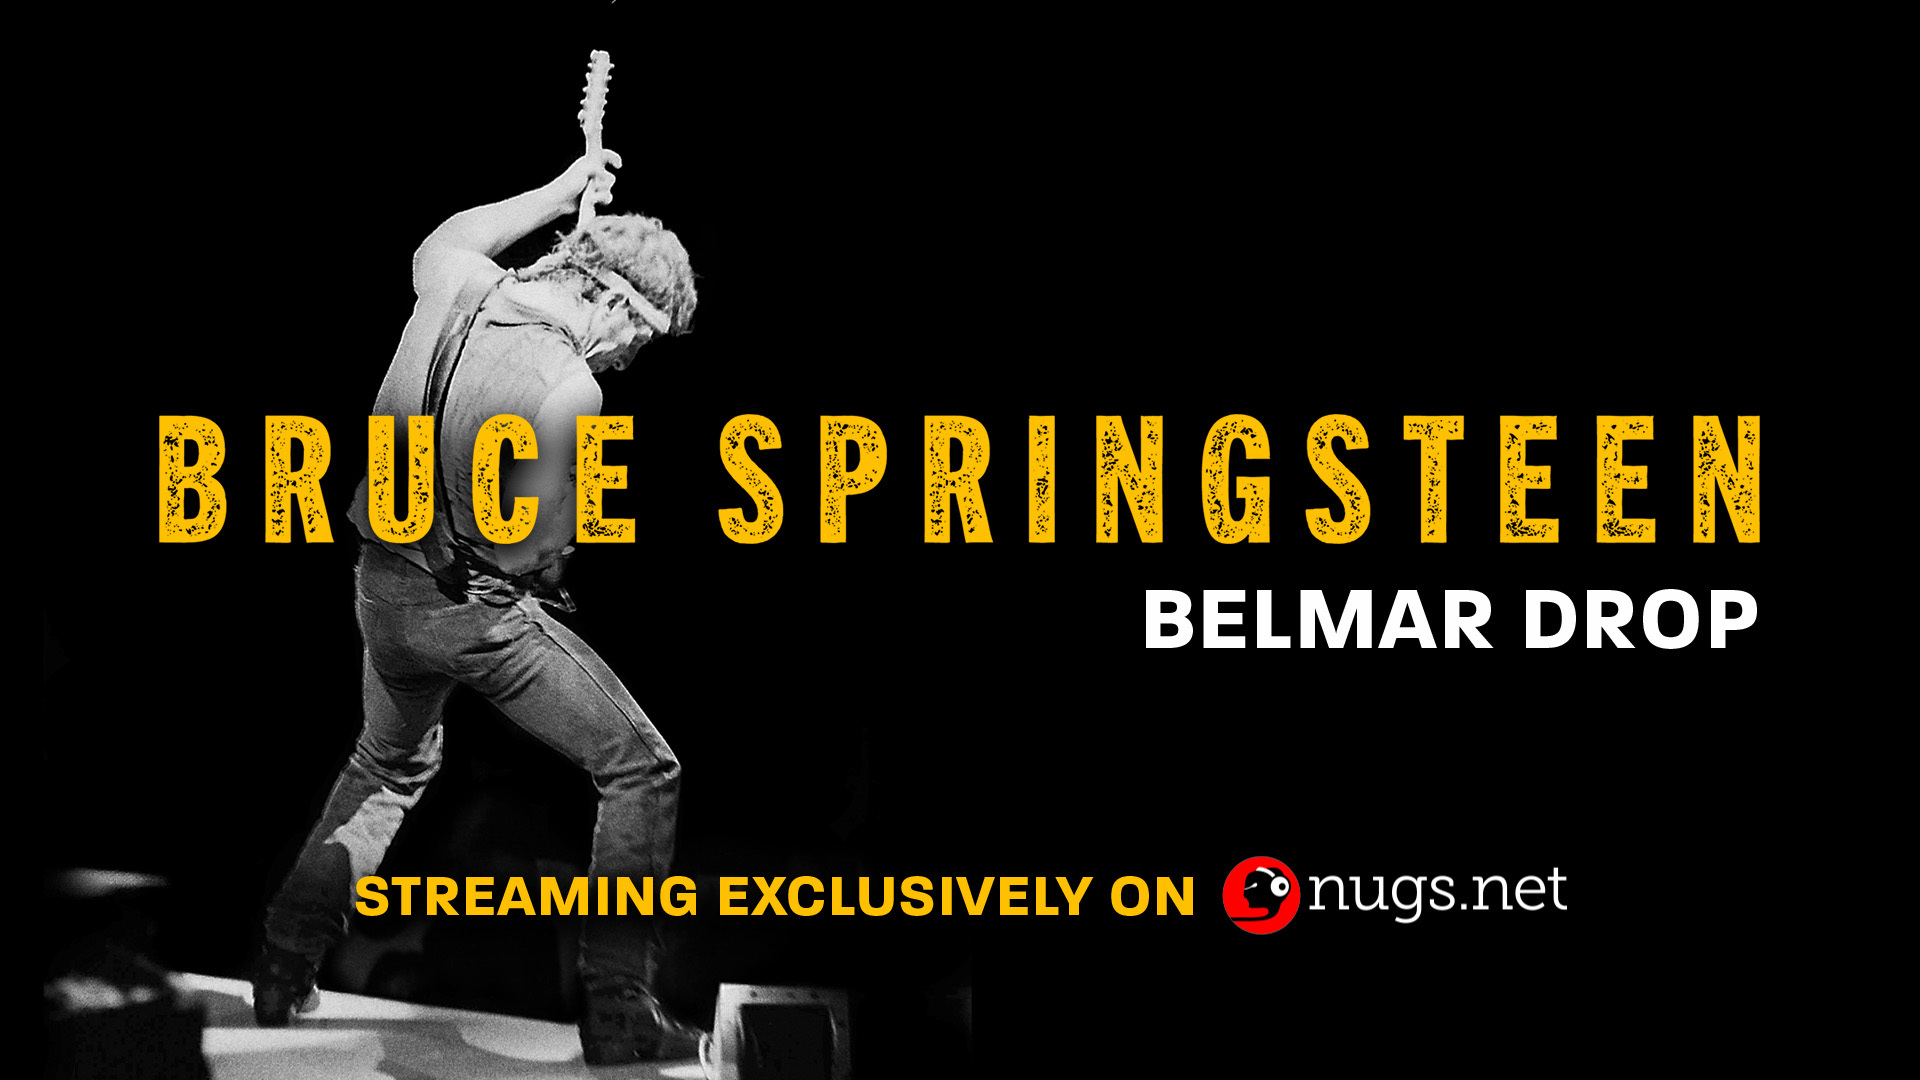 Stream The Most Recent Drop of Exclusive Bruce Springsteen Shows